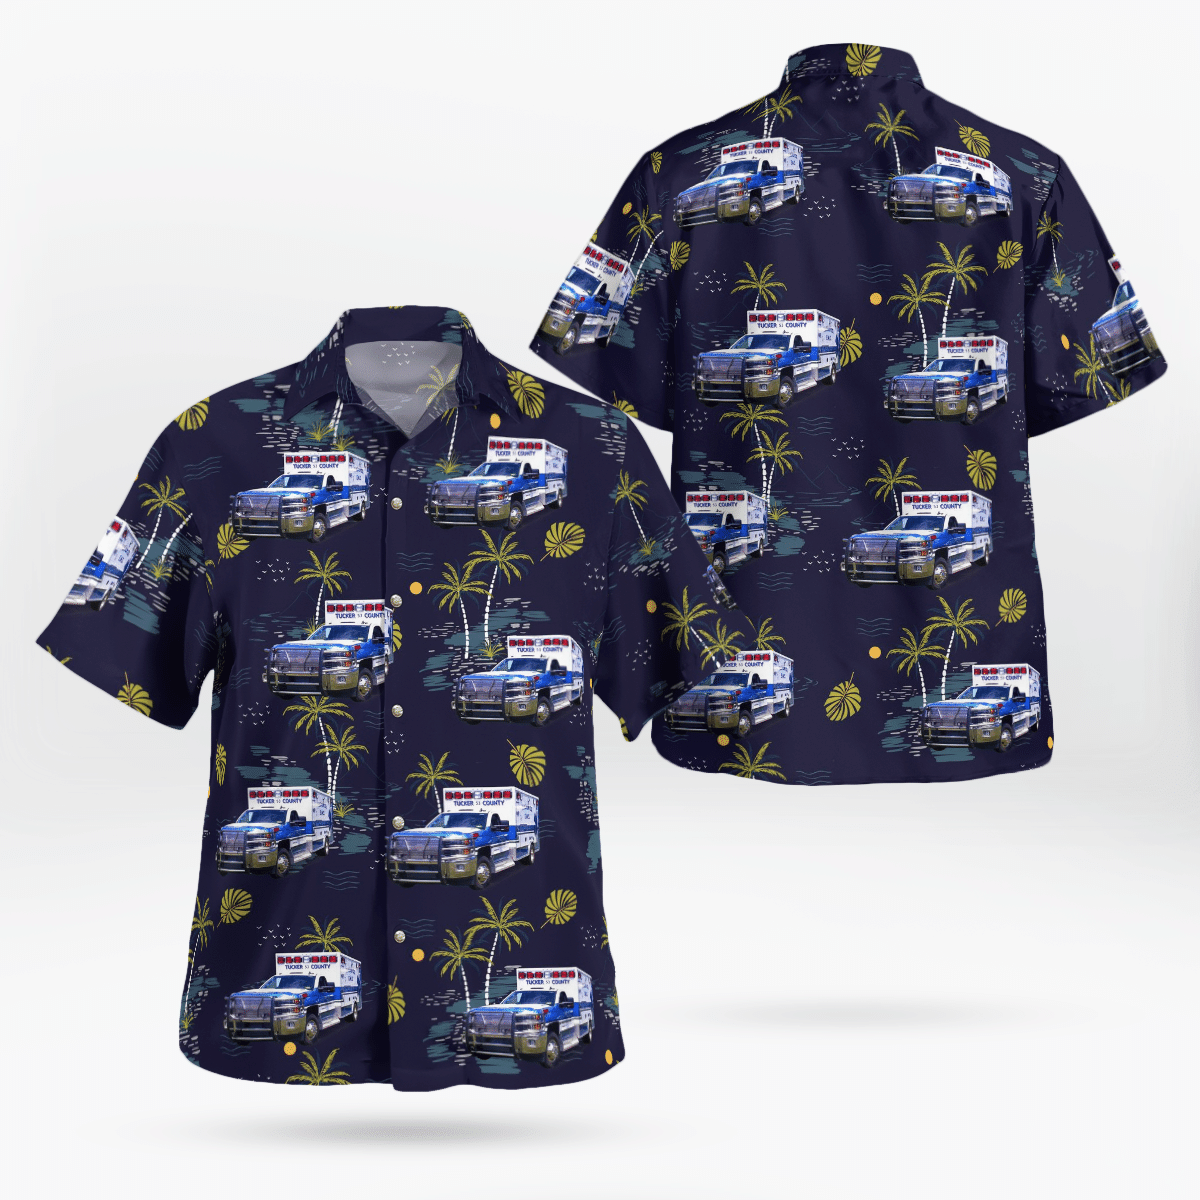 If you are in need of a new summertime look, pick up this Hawaiian shirt 50